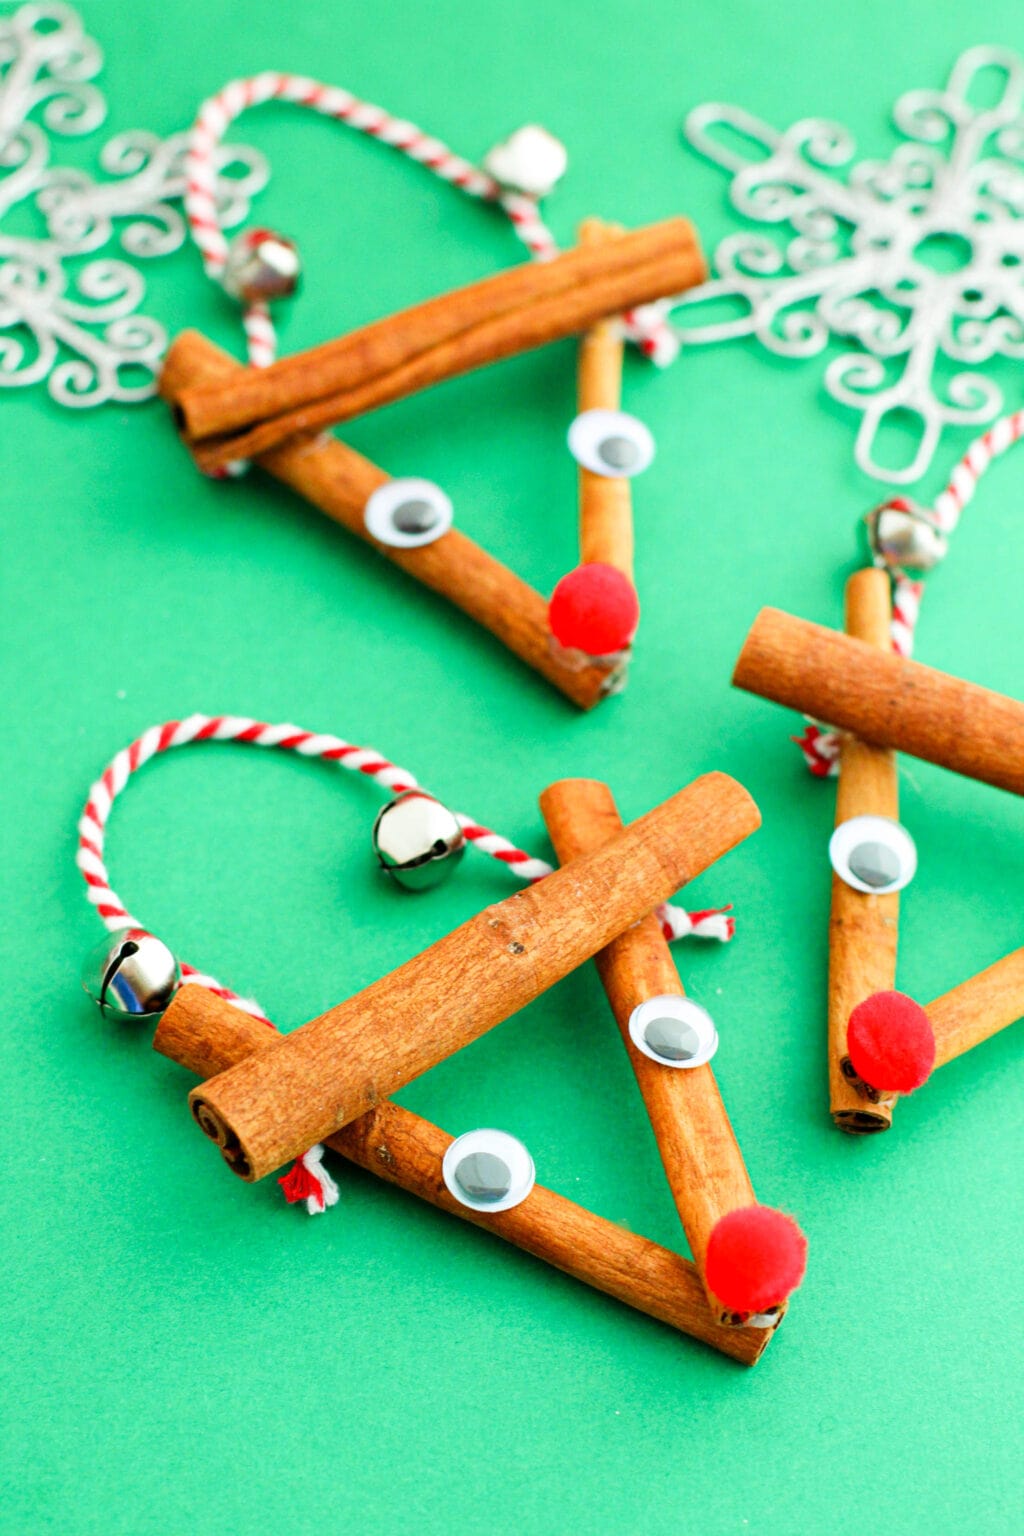 These Cinnamon Stick Reindeer Ornaments require a few simple supplies and are the perfect holiday ornament to make with kids.